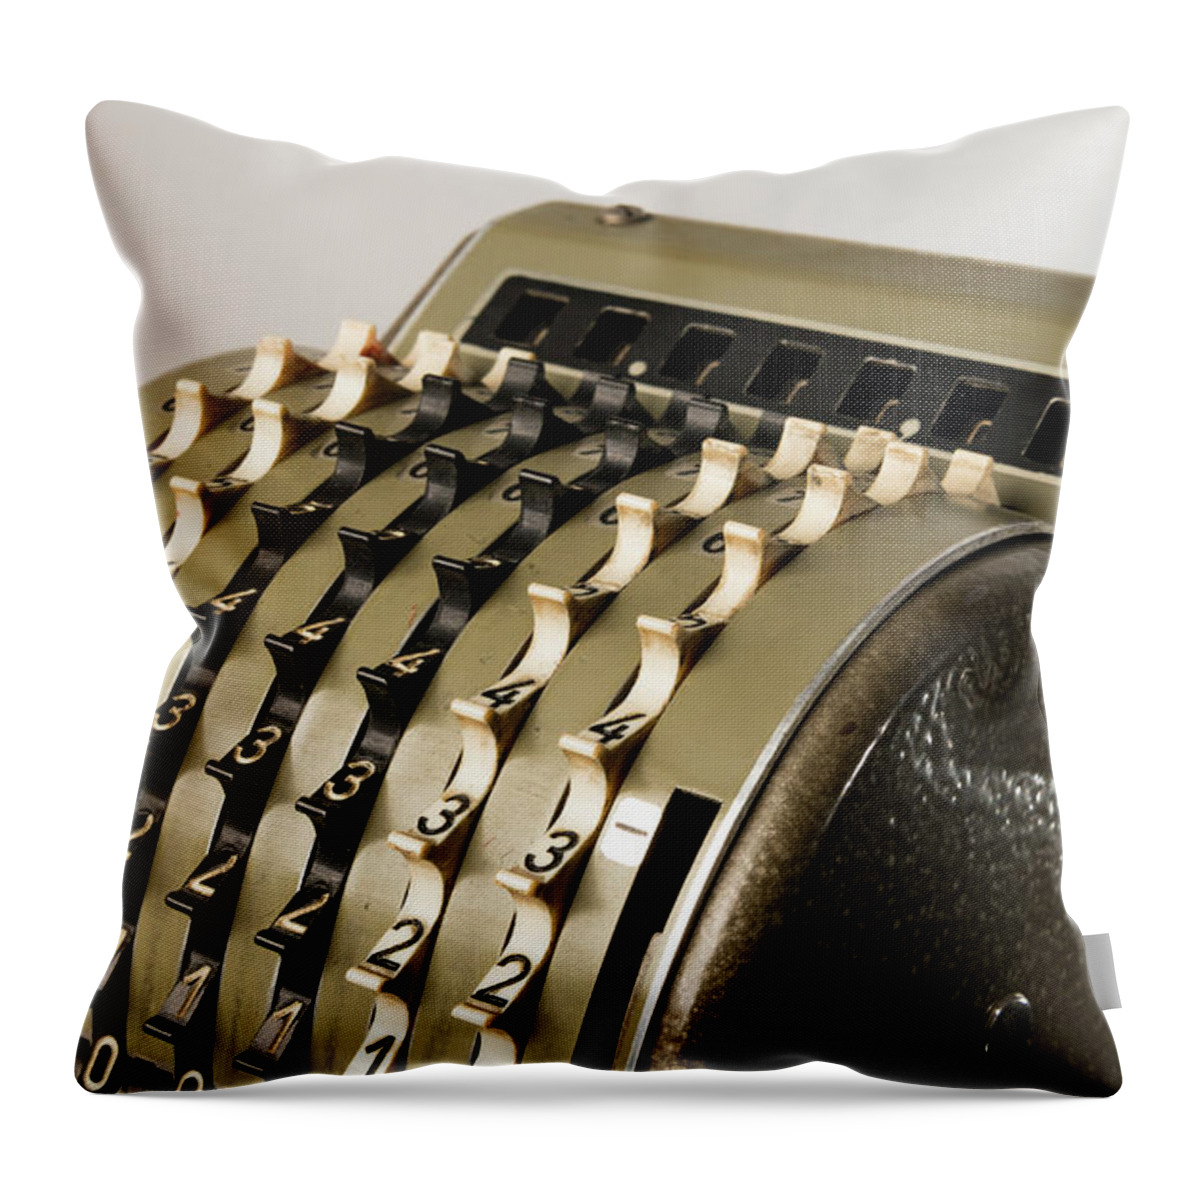 Details of a old vintage mechanical calculator Throw Pillow by Stefan Rotter  - Pixels